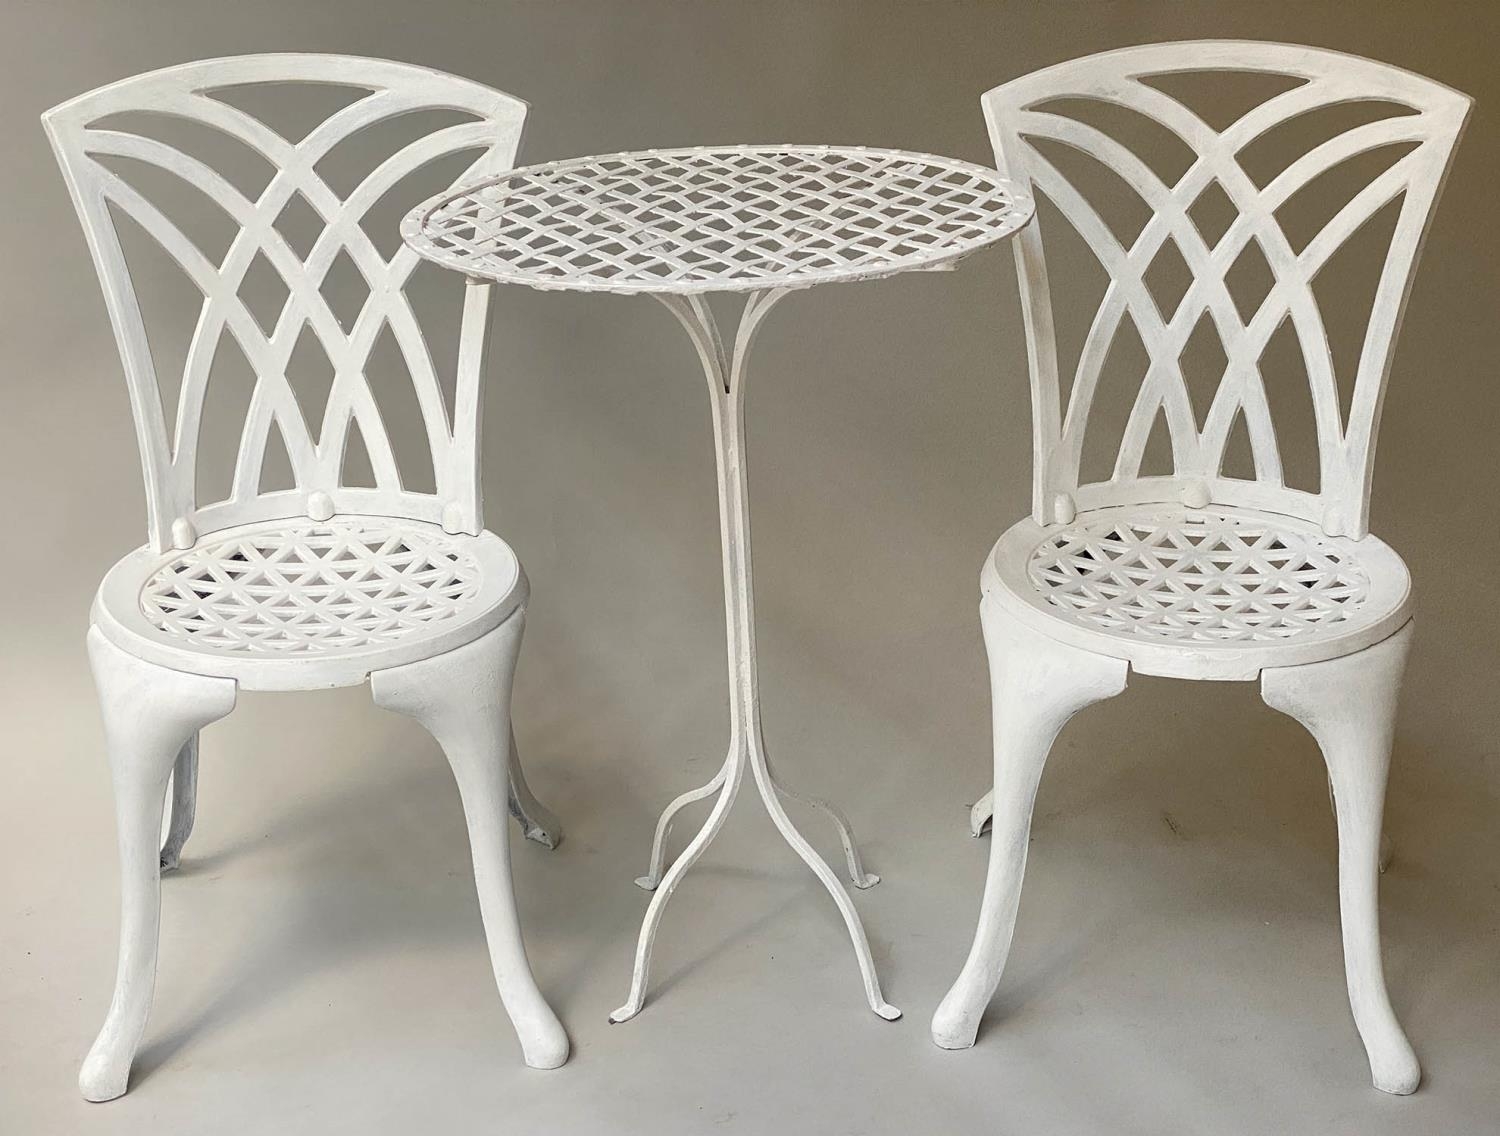 BALCONY/TERRACE SET, vintage mid 20th century French white painted wrought iron, circular pierced